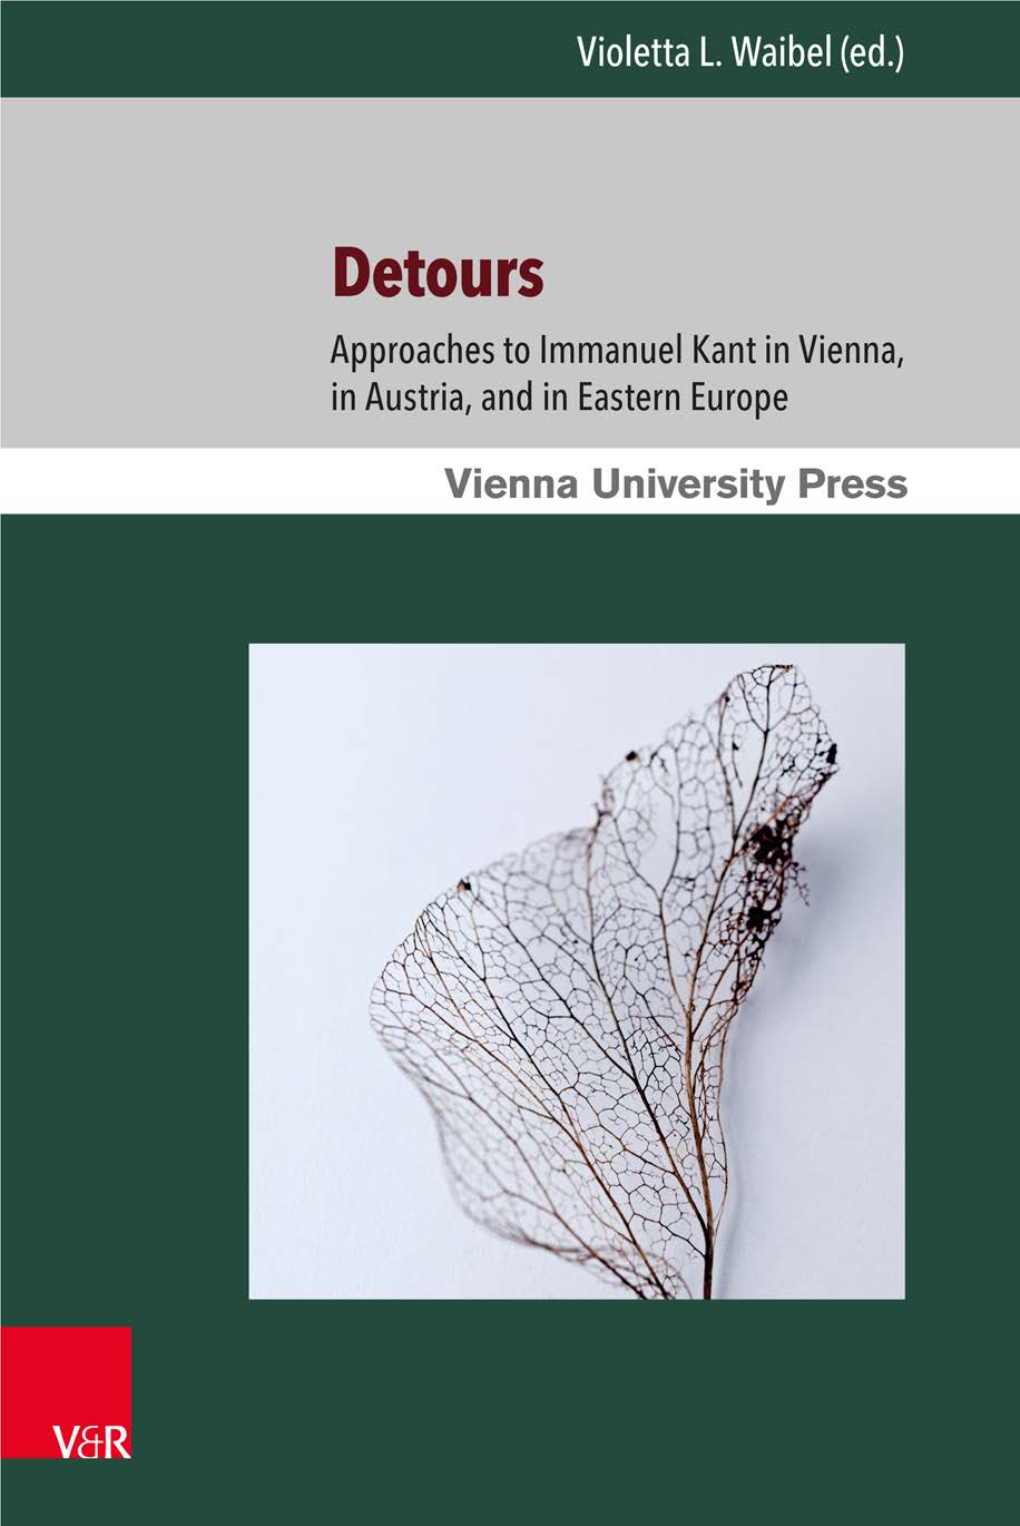 Introduction to the Detours Reader by Violetta L. Waibel